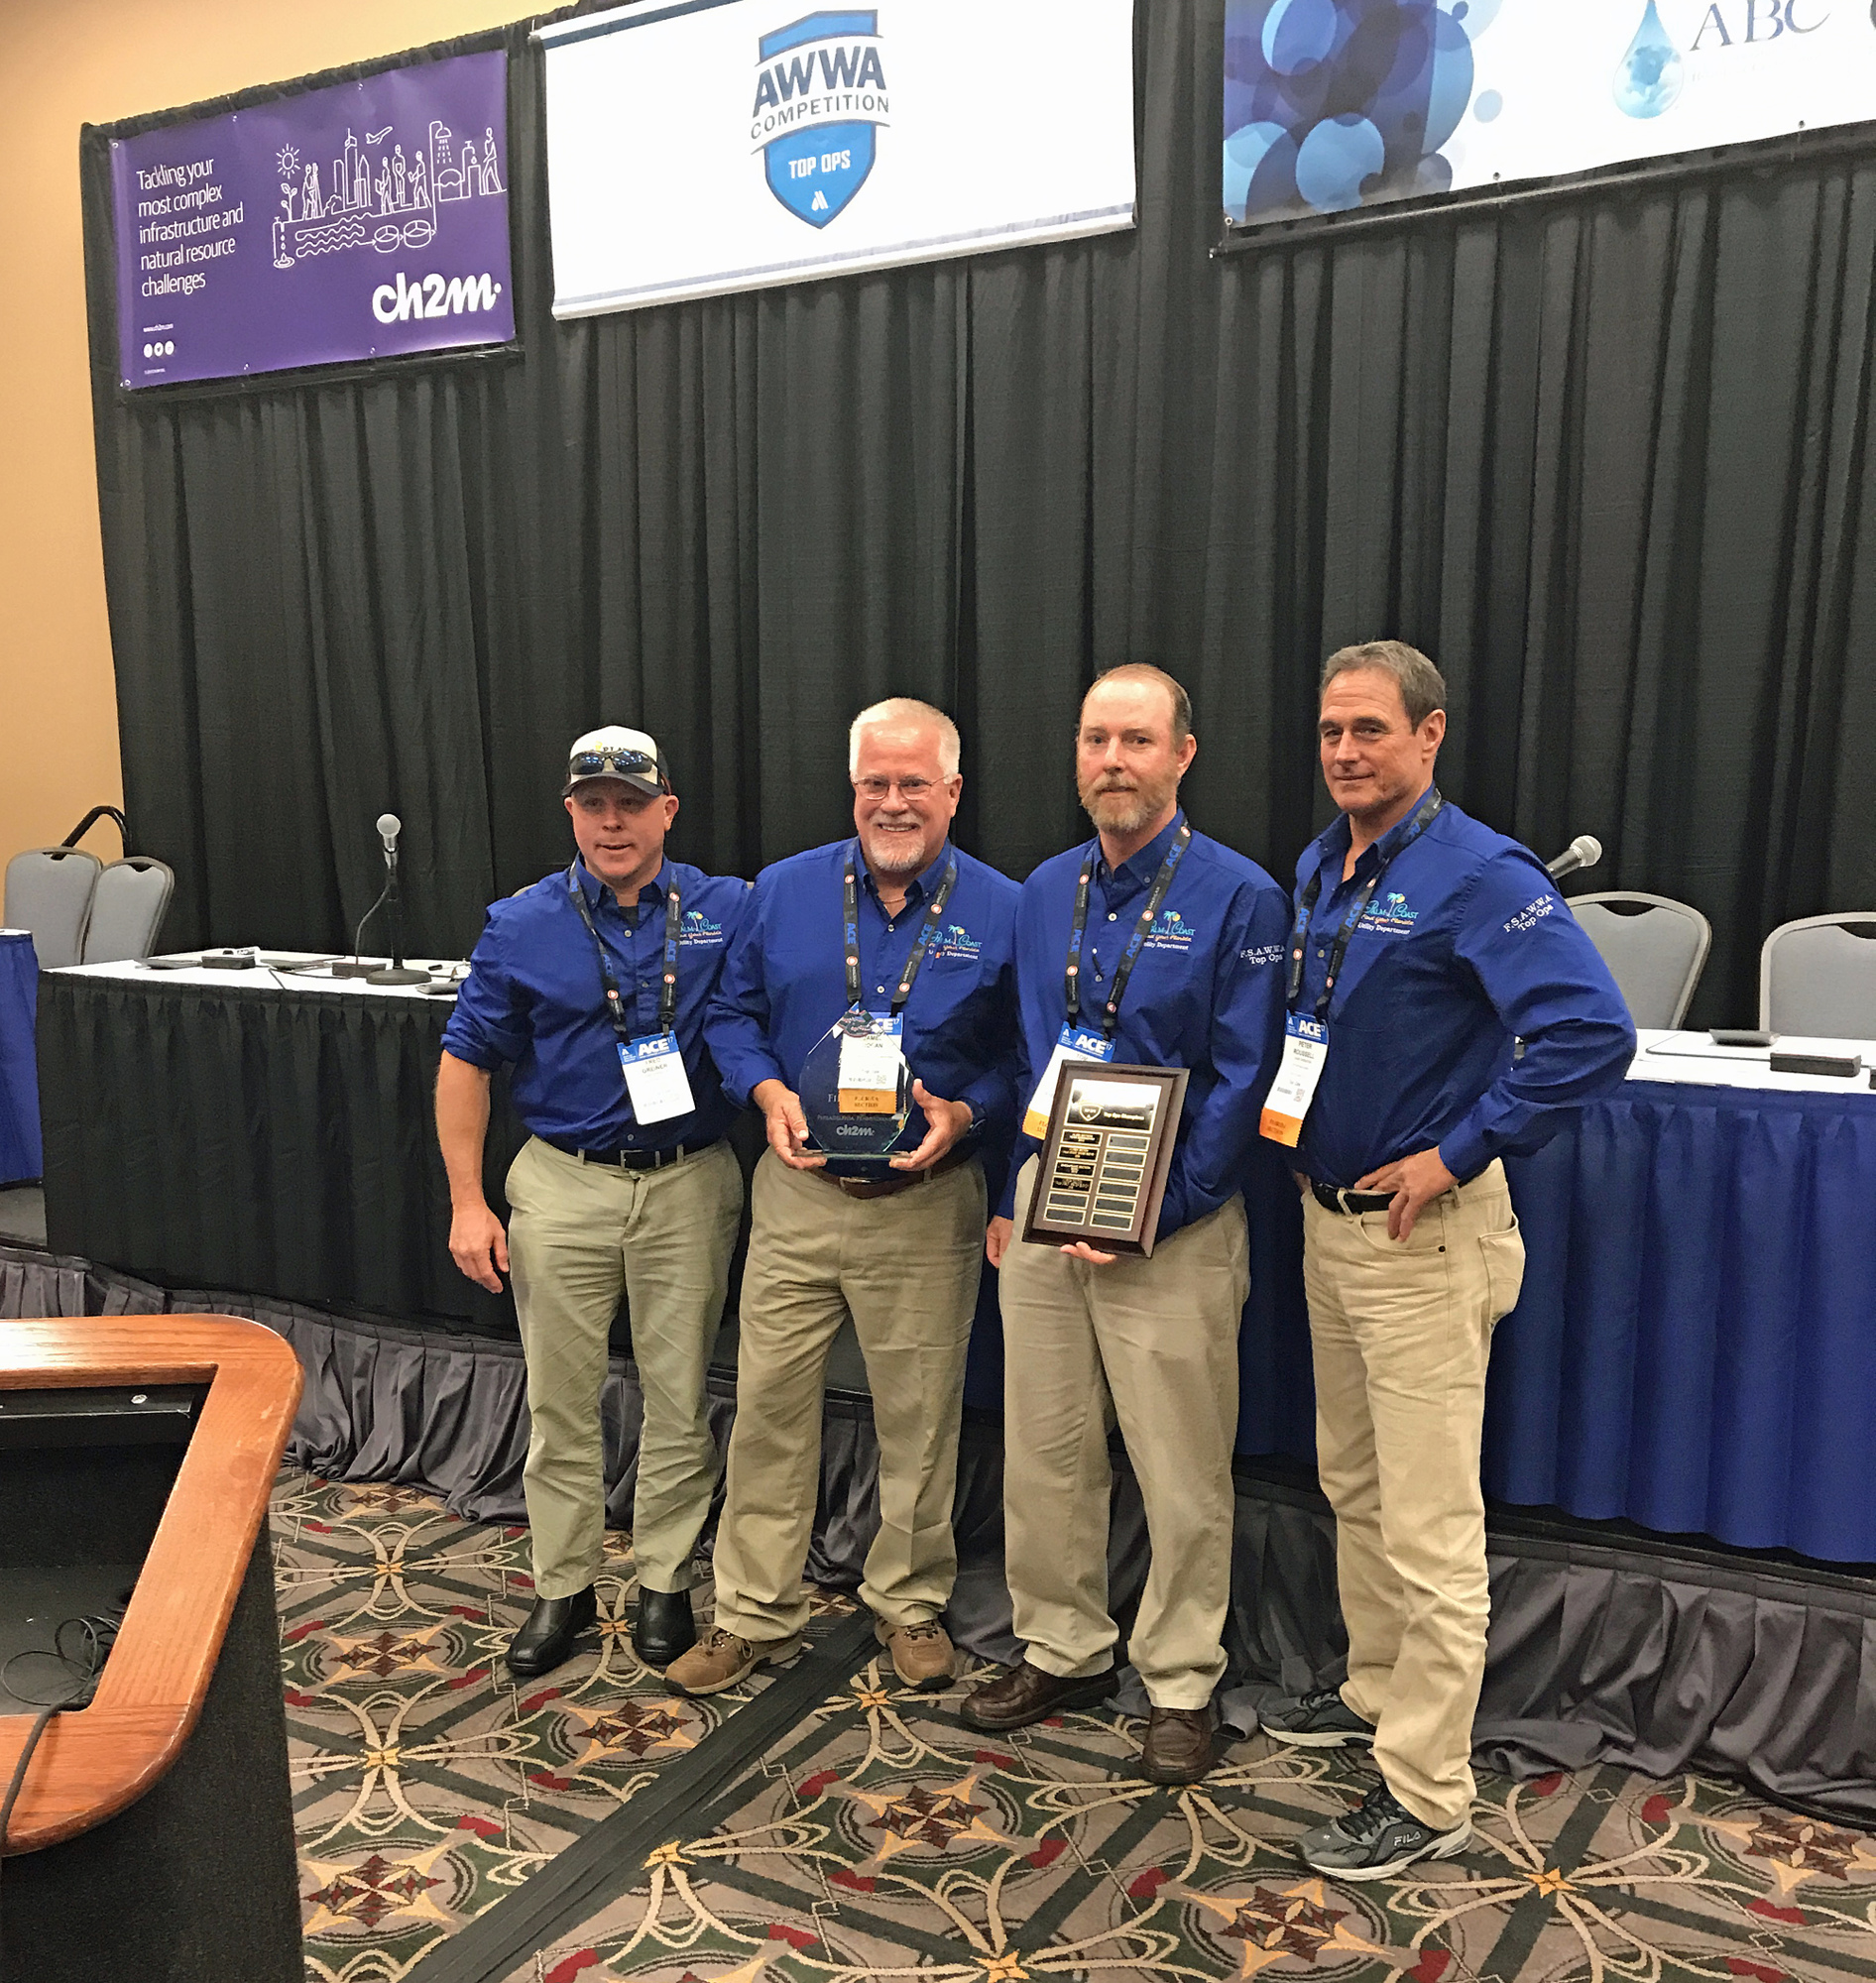 The Top Ops National Championship team is Fred Greiner, Jim Hogan, Tom Martens and Peter Roussell, all of the Palm Coast Utility Department. Photo courtesy of the City of Palm Coast press release